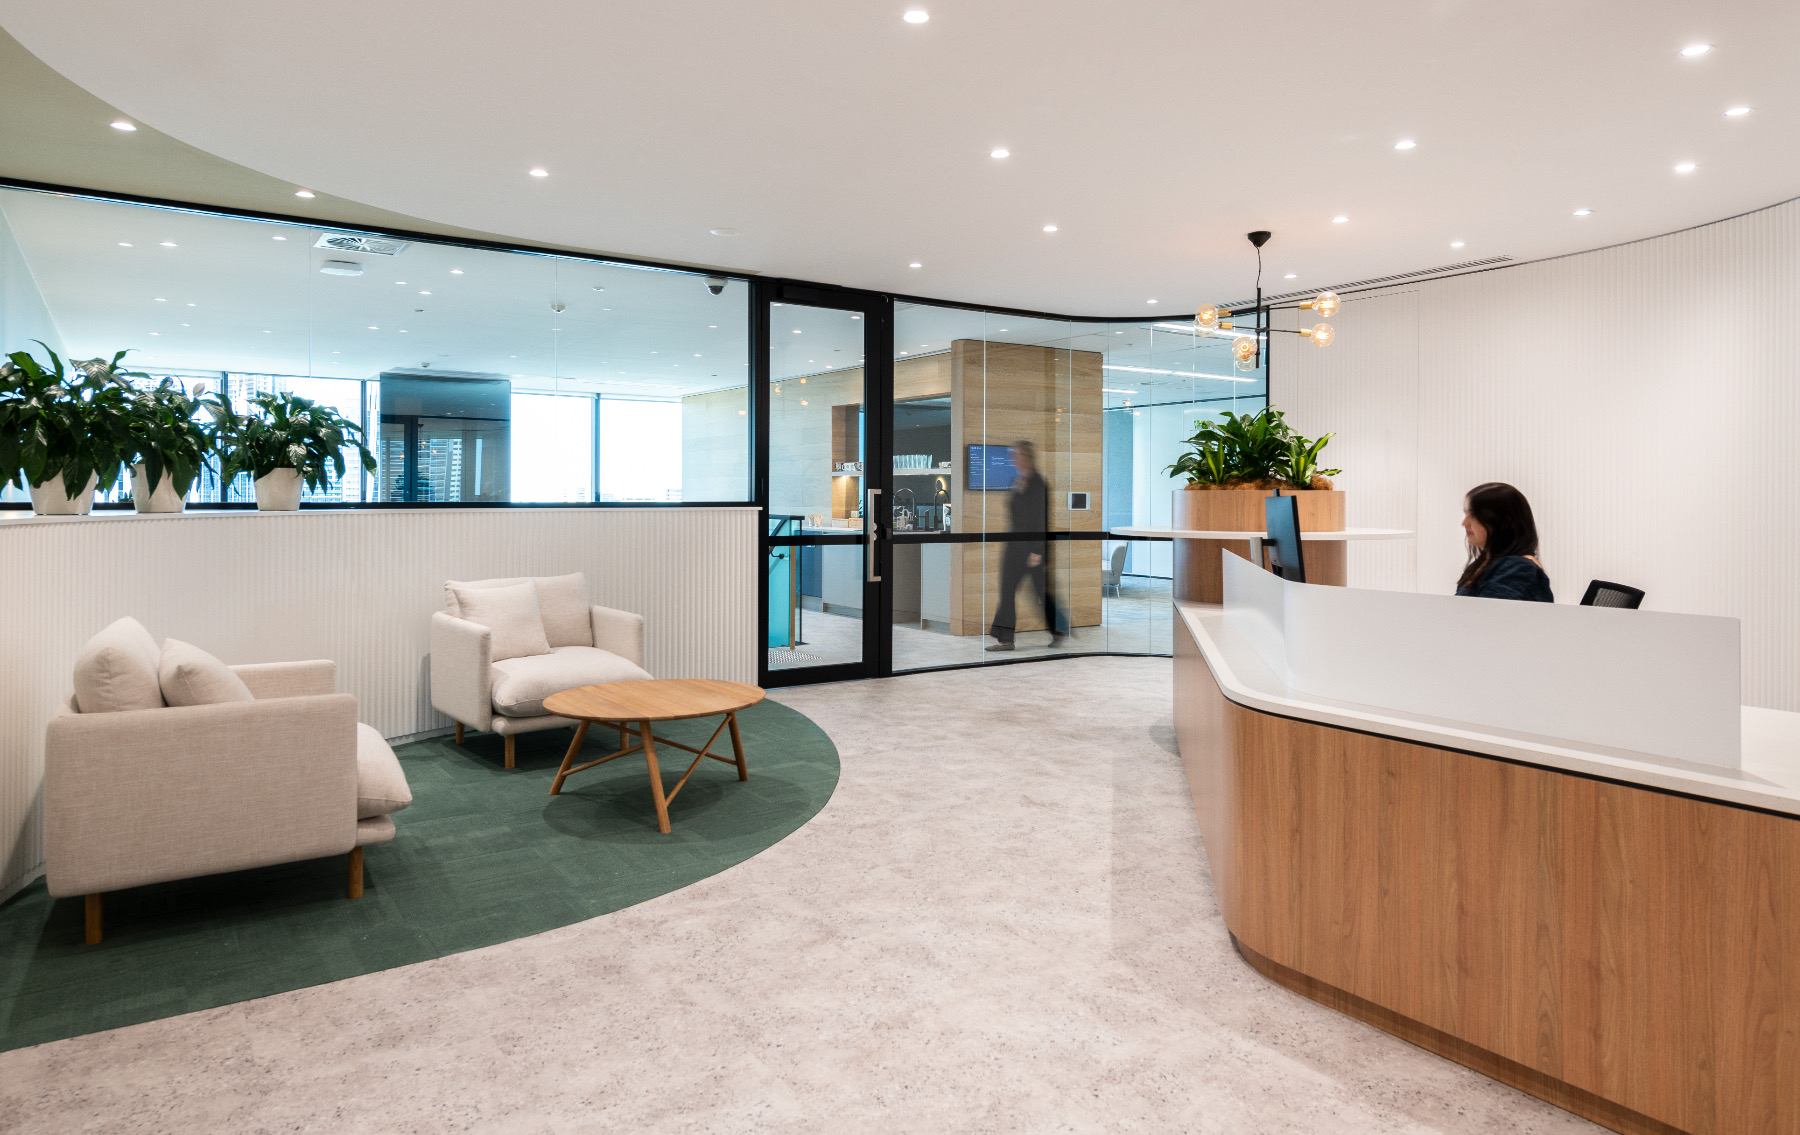 A Look Inside Colgate’s New Sydney Office